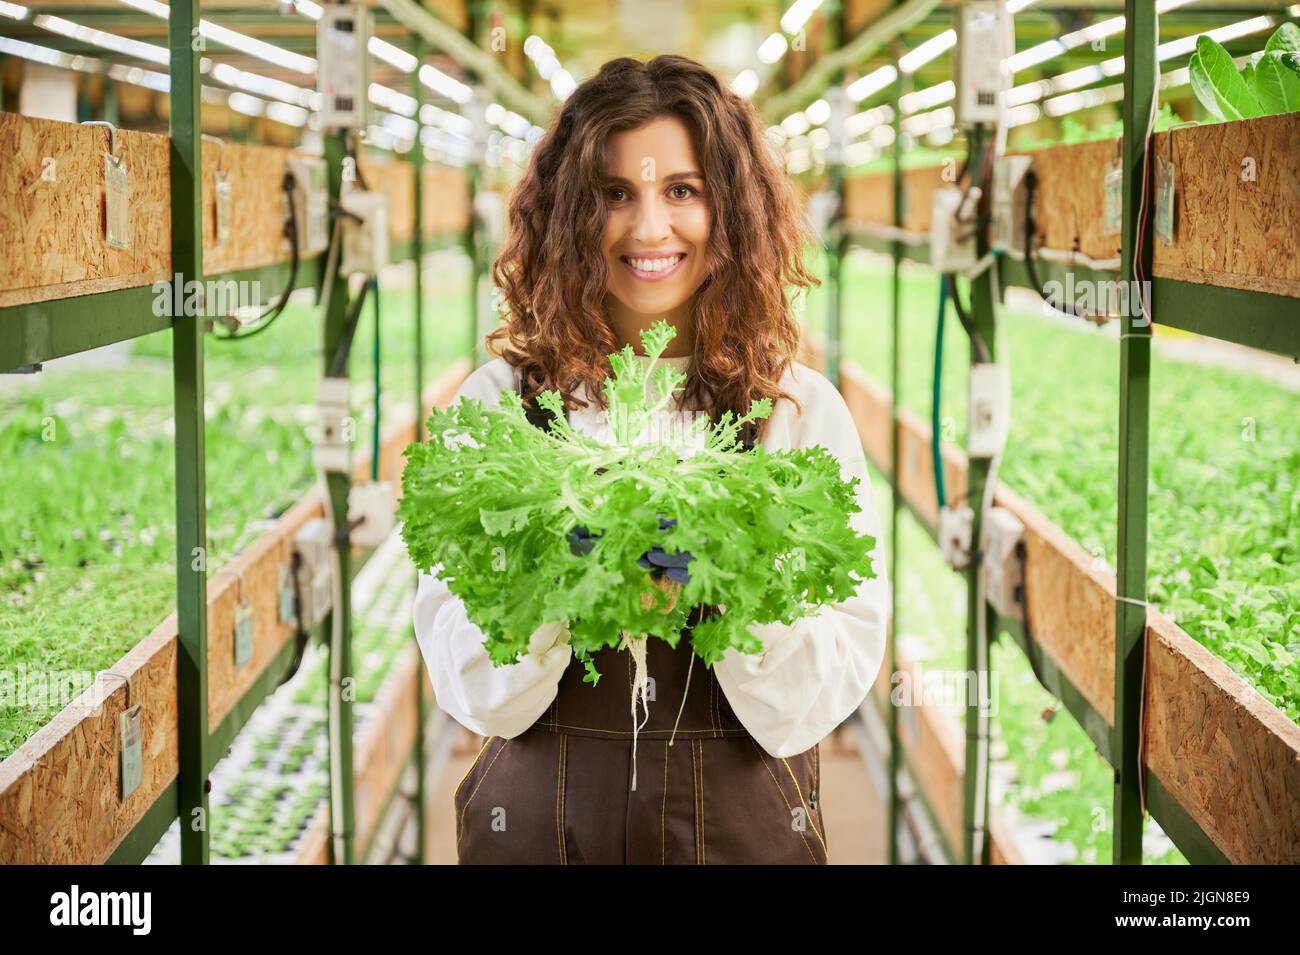 Cheerful female gardener looking at camera and smiling while holding green leafy plant. Young woman standing in aisle between shelves with plants in greenhouse. Stock Photo